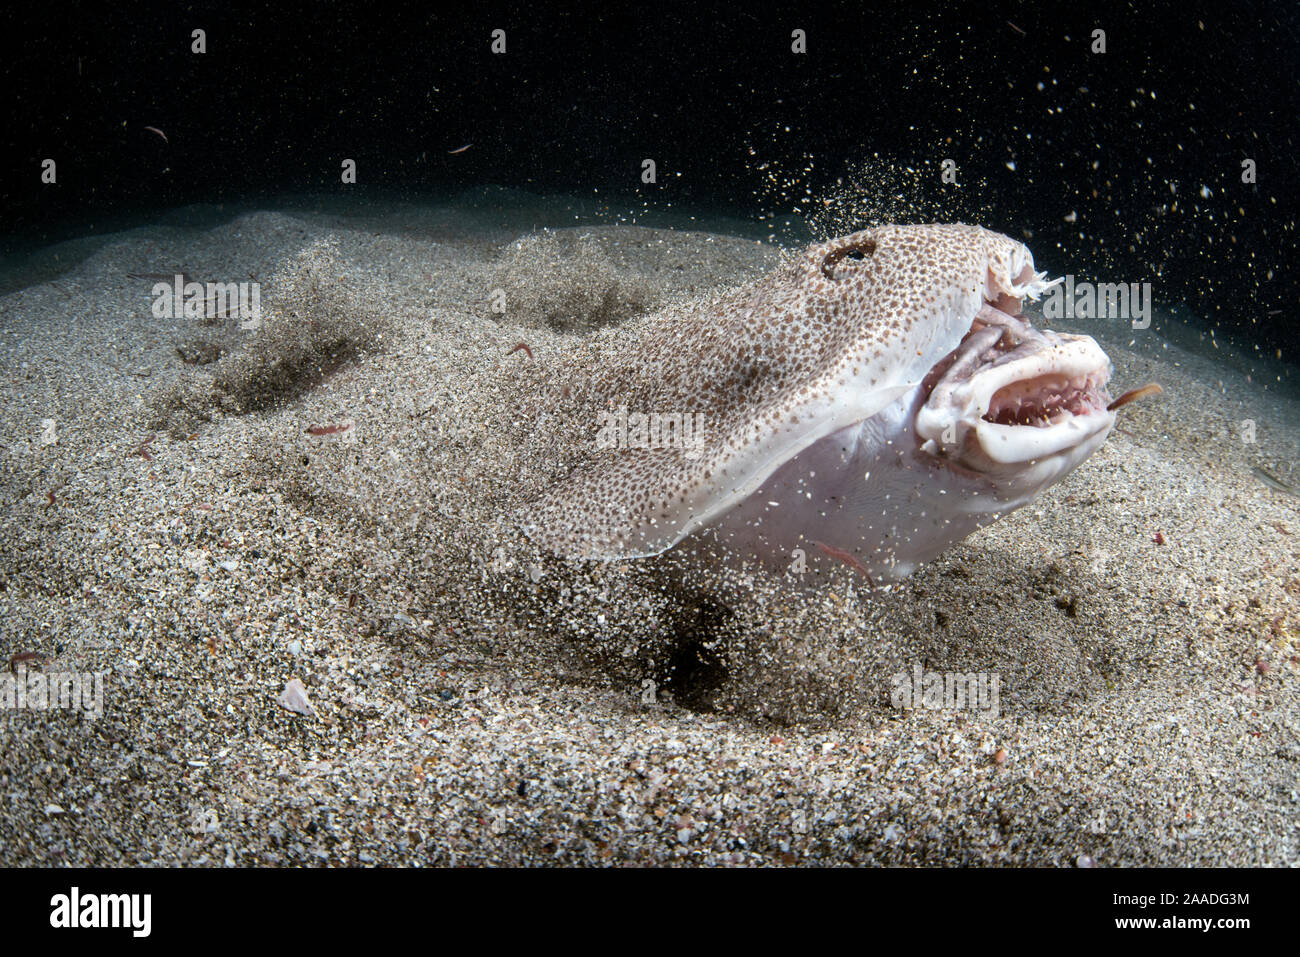 Japanese angelshark (Squatina japonica) engaged in ambush predation, leaping out of the sand to catch a small silver-stripe round herring (Spratelloides gracilis). The shark's extended jaws are clearly visible. Japan, Pacific. Stock Photo